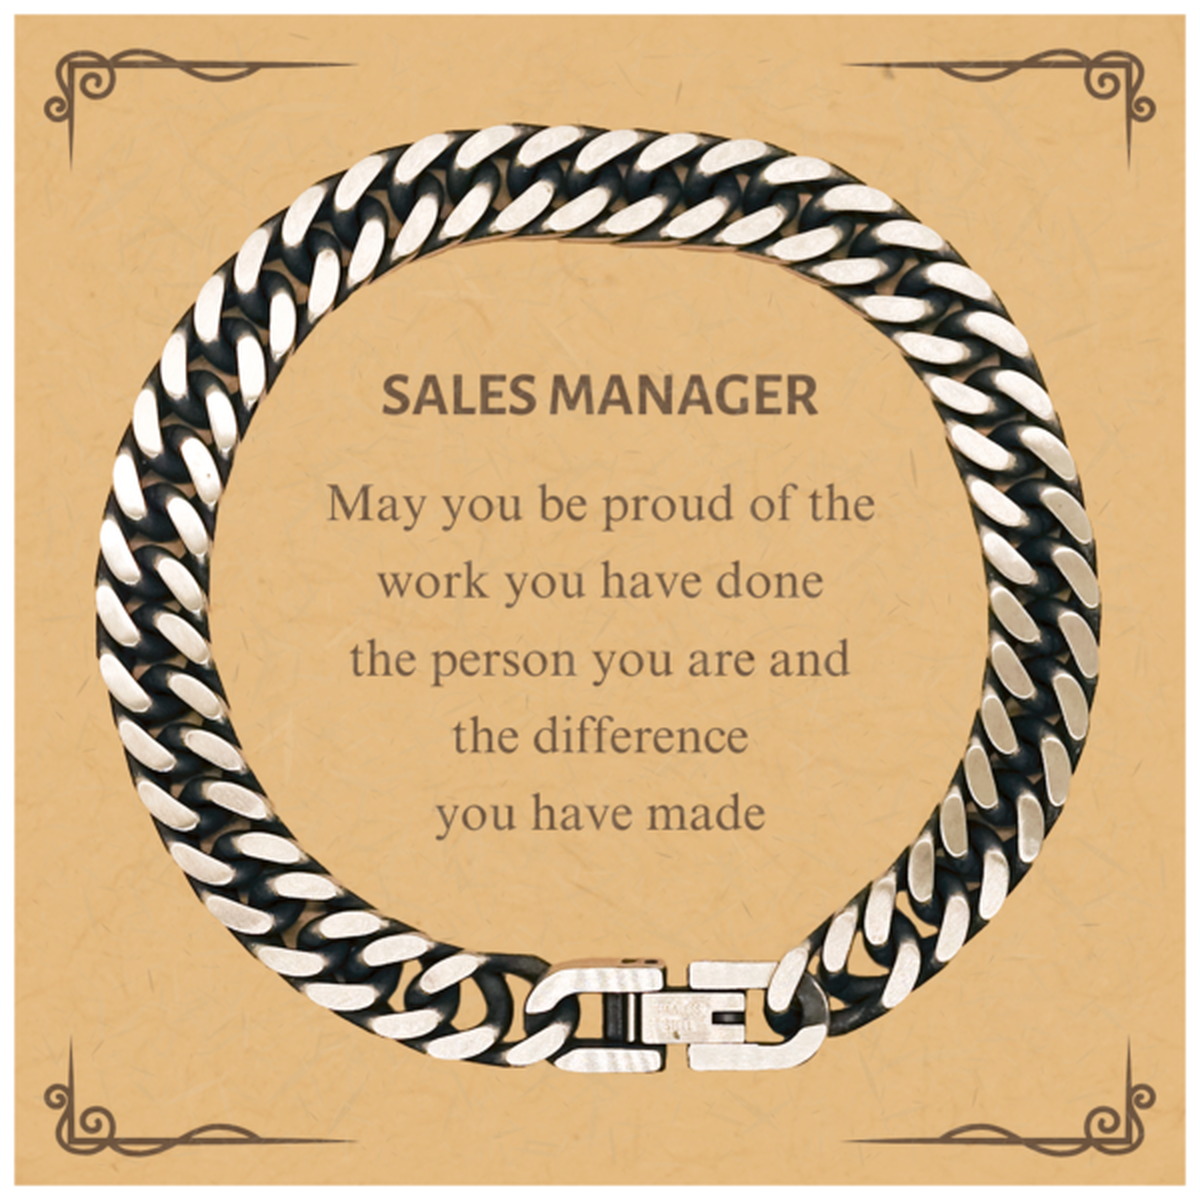 Sales Manager May you be proud of the work you have done, Retirement Sales Manager Cuban Link Chain Bracelet for Colleague Appreciation Gifts Amazing for Sales Manager